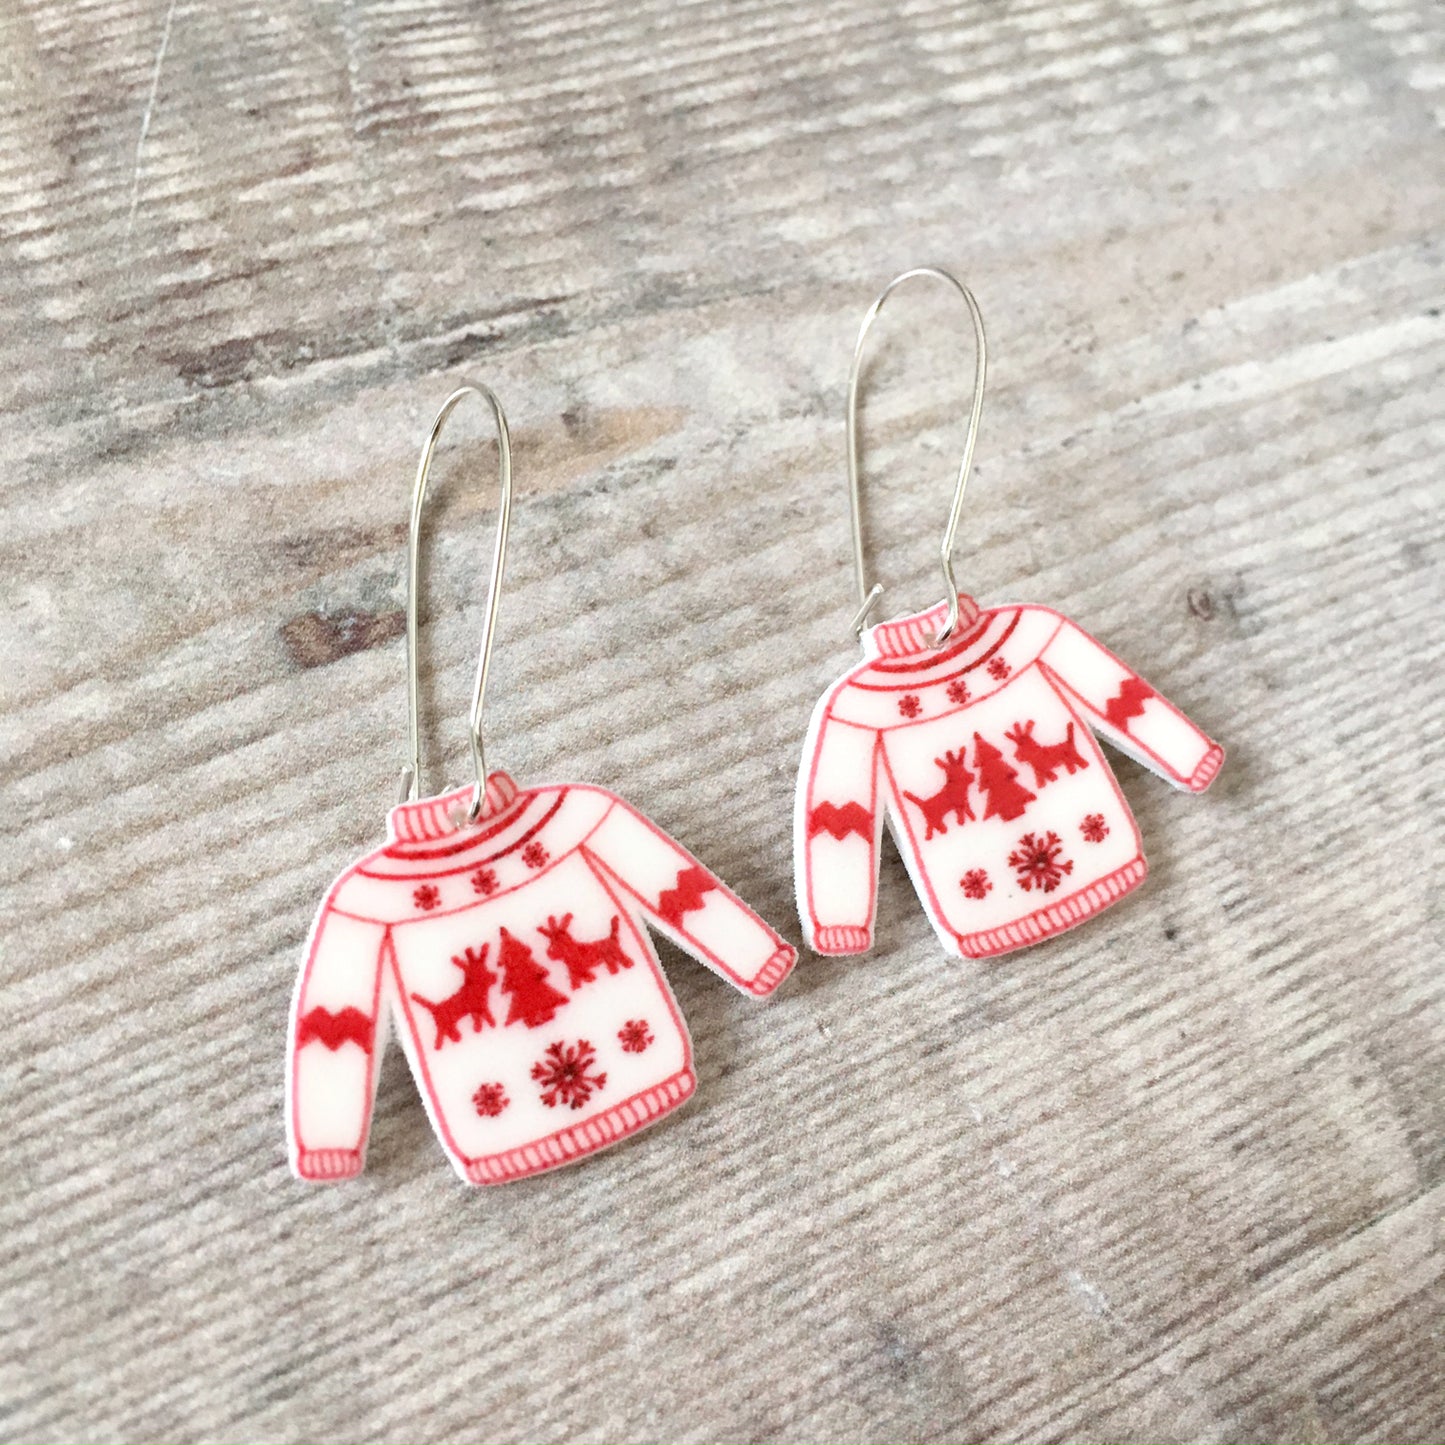 Christmas jumper funny holiday drop earrings - Christmas party fashion